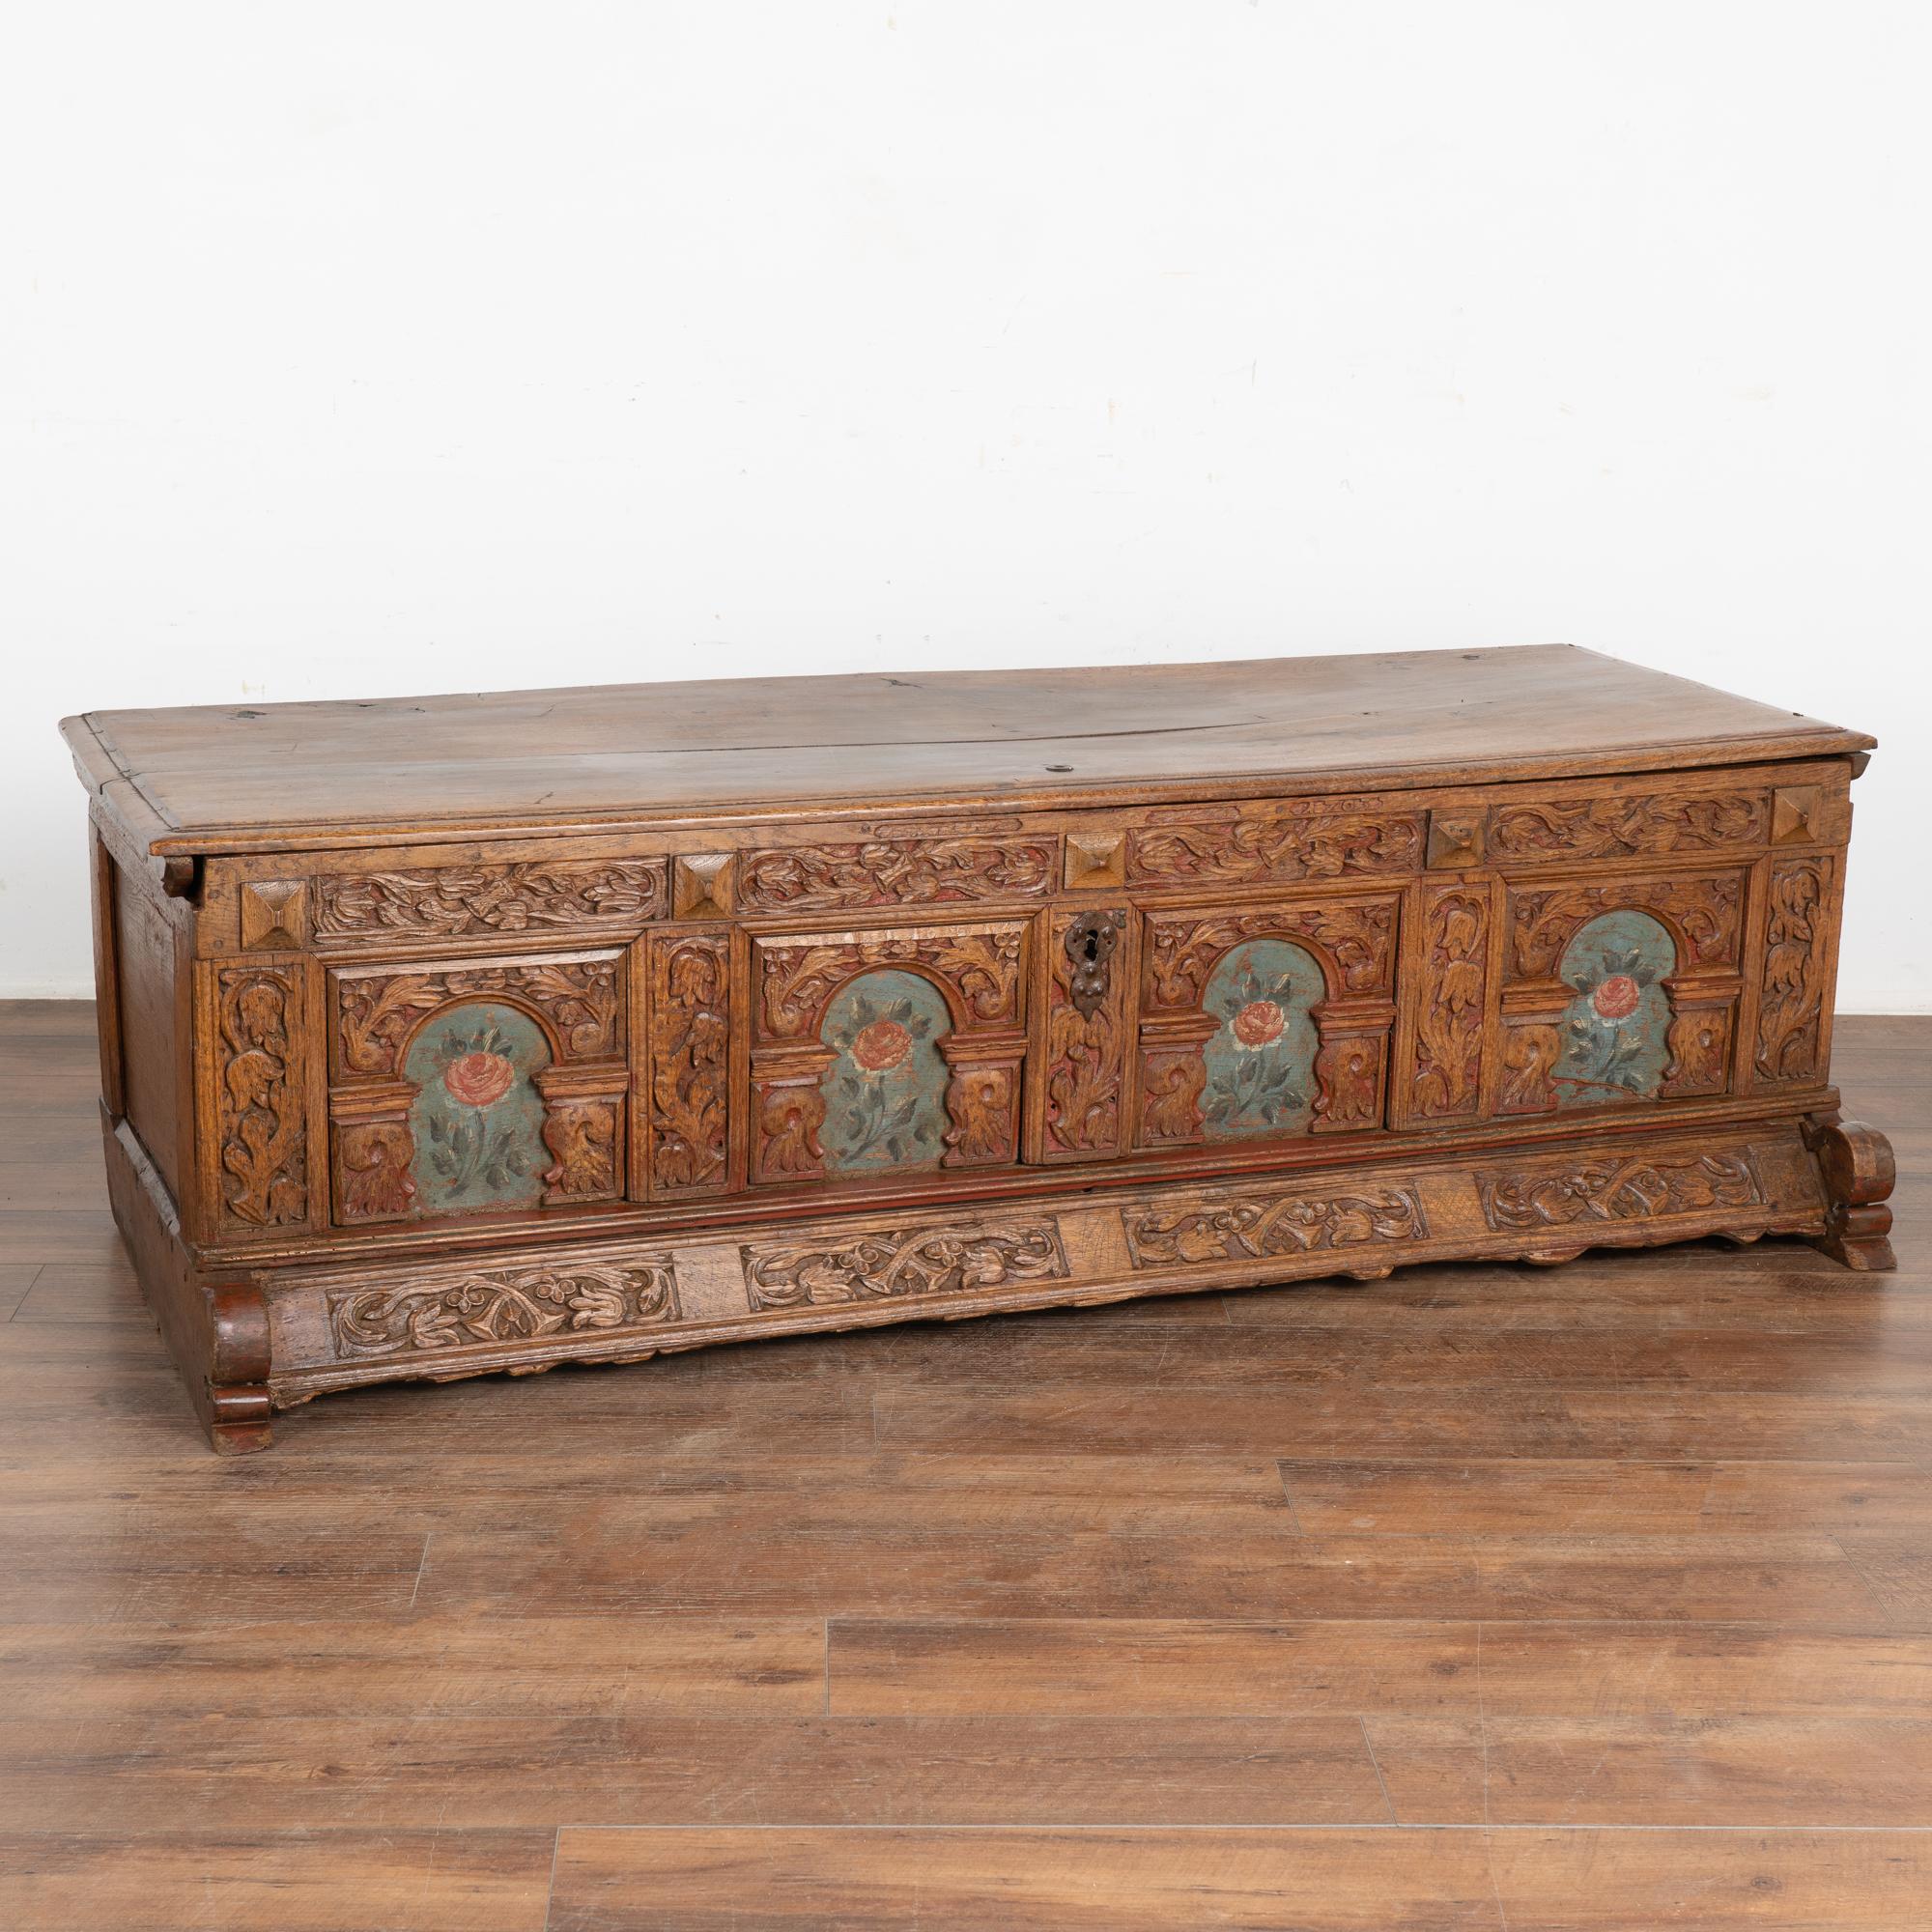 It is the beautiful hand-carved details that make this trunk or 